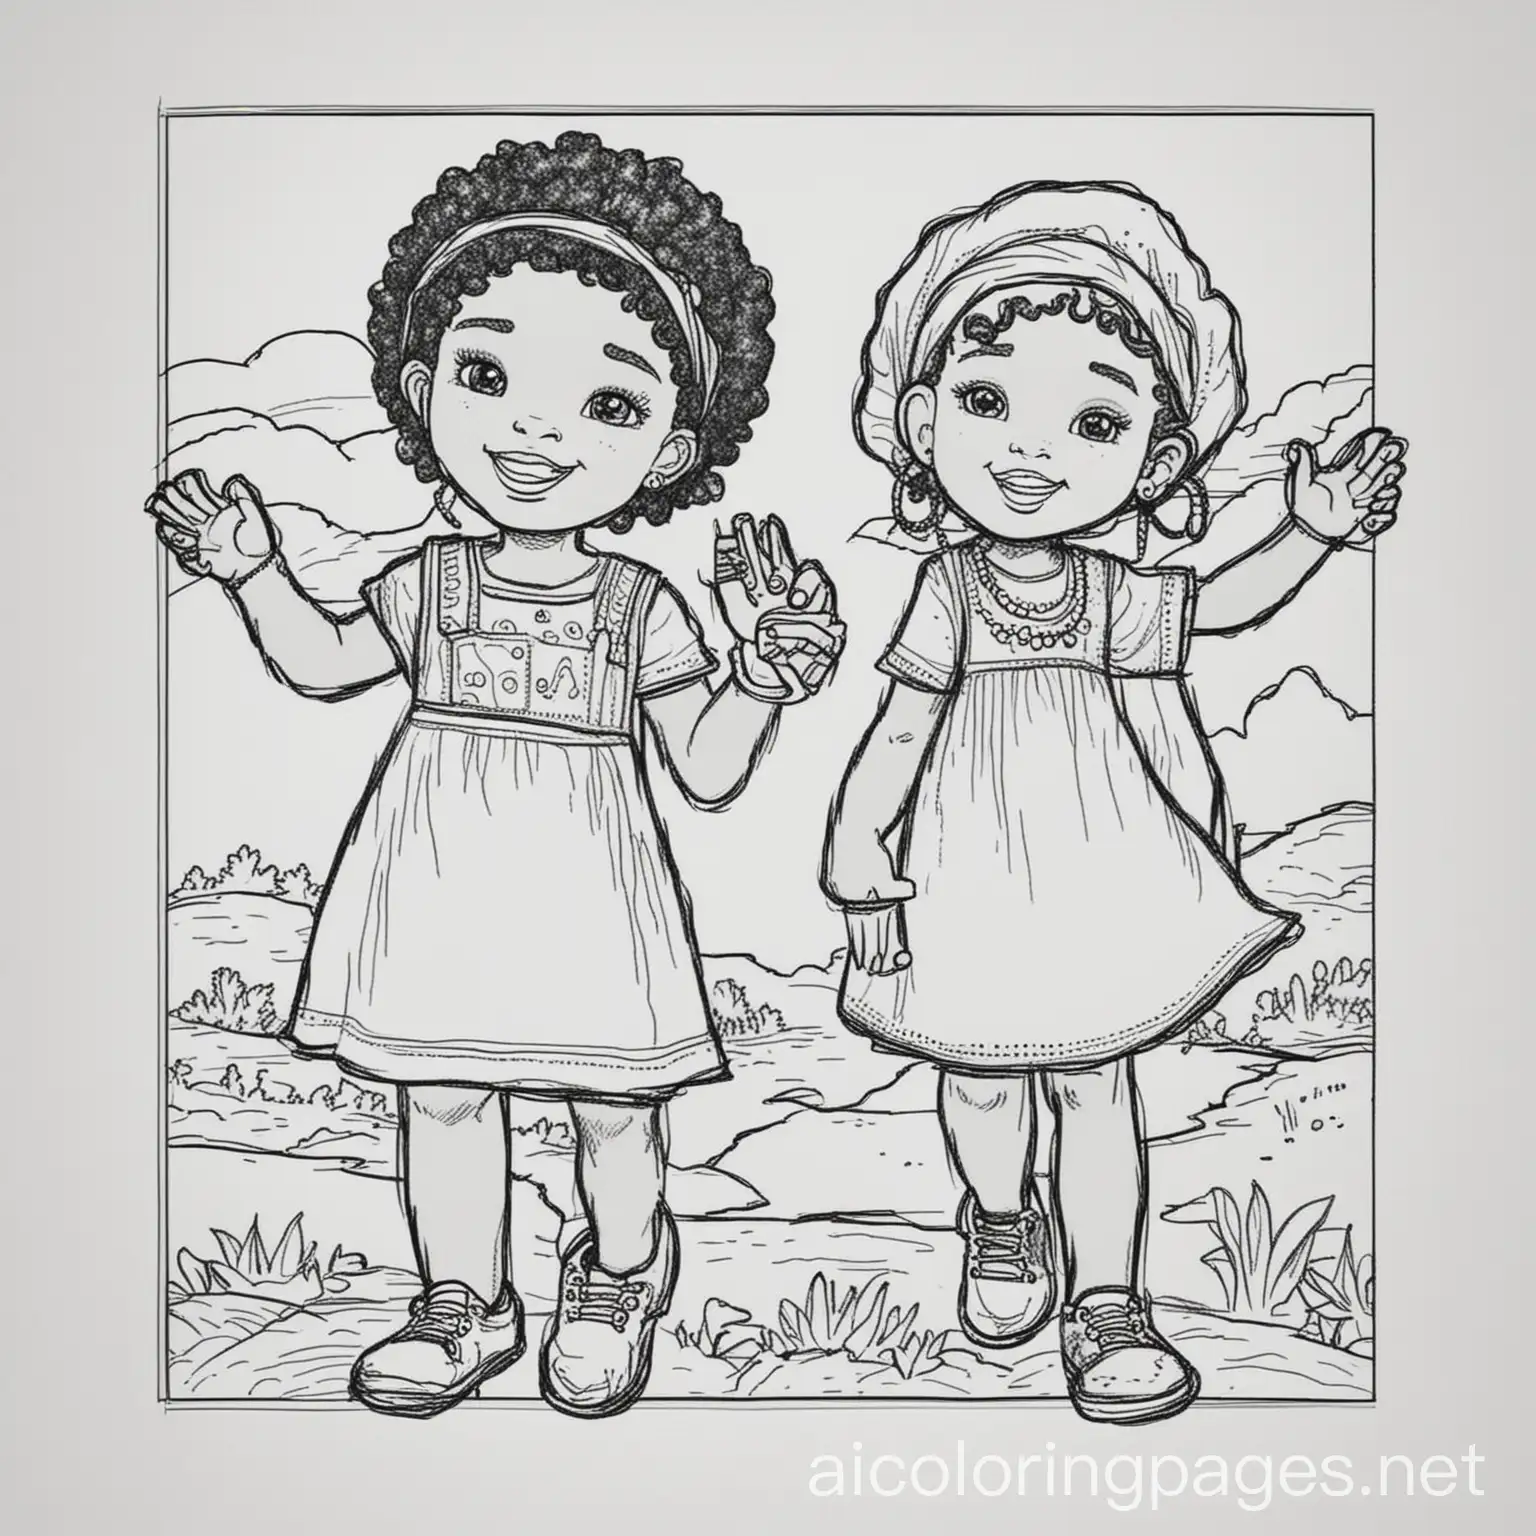 Juneteenth-Celebration-Coloring-Page-for-African-American-Children